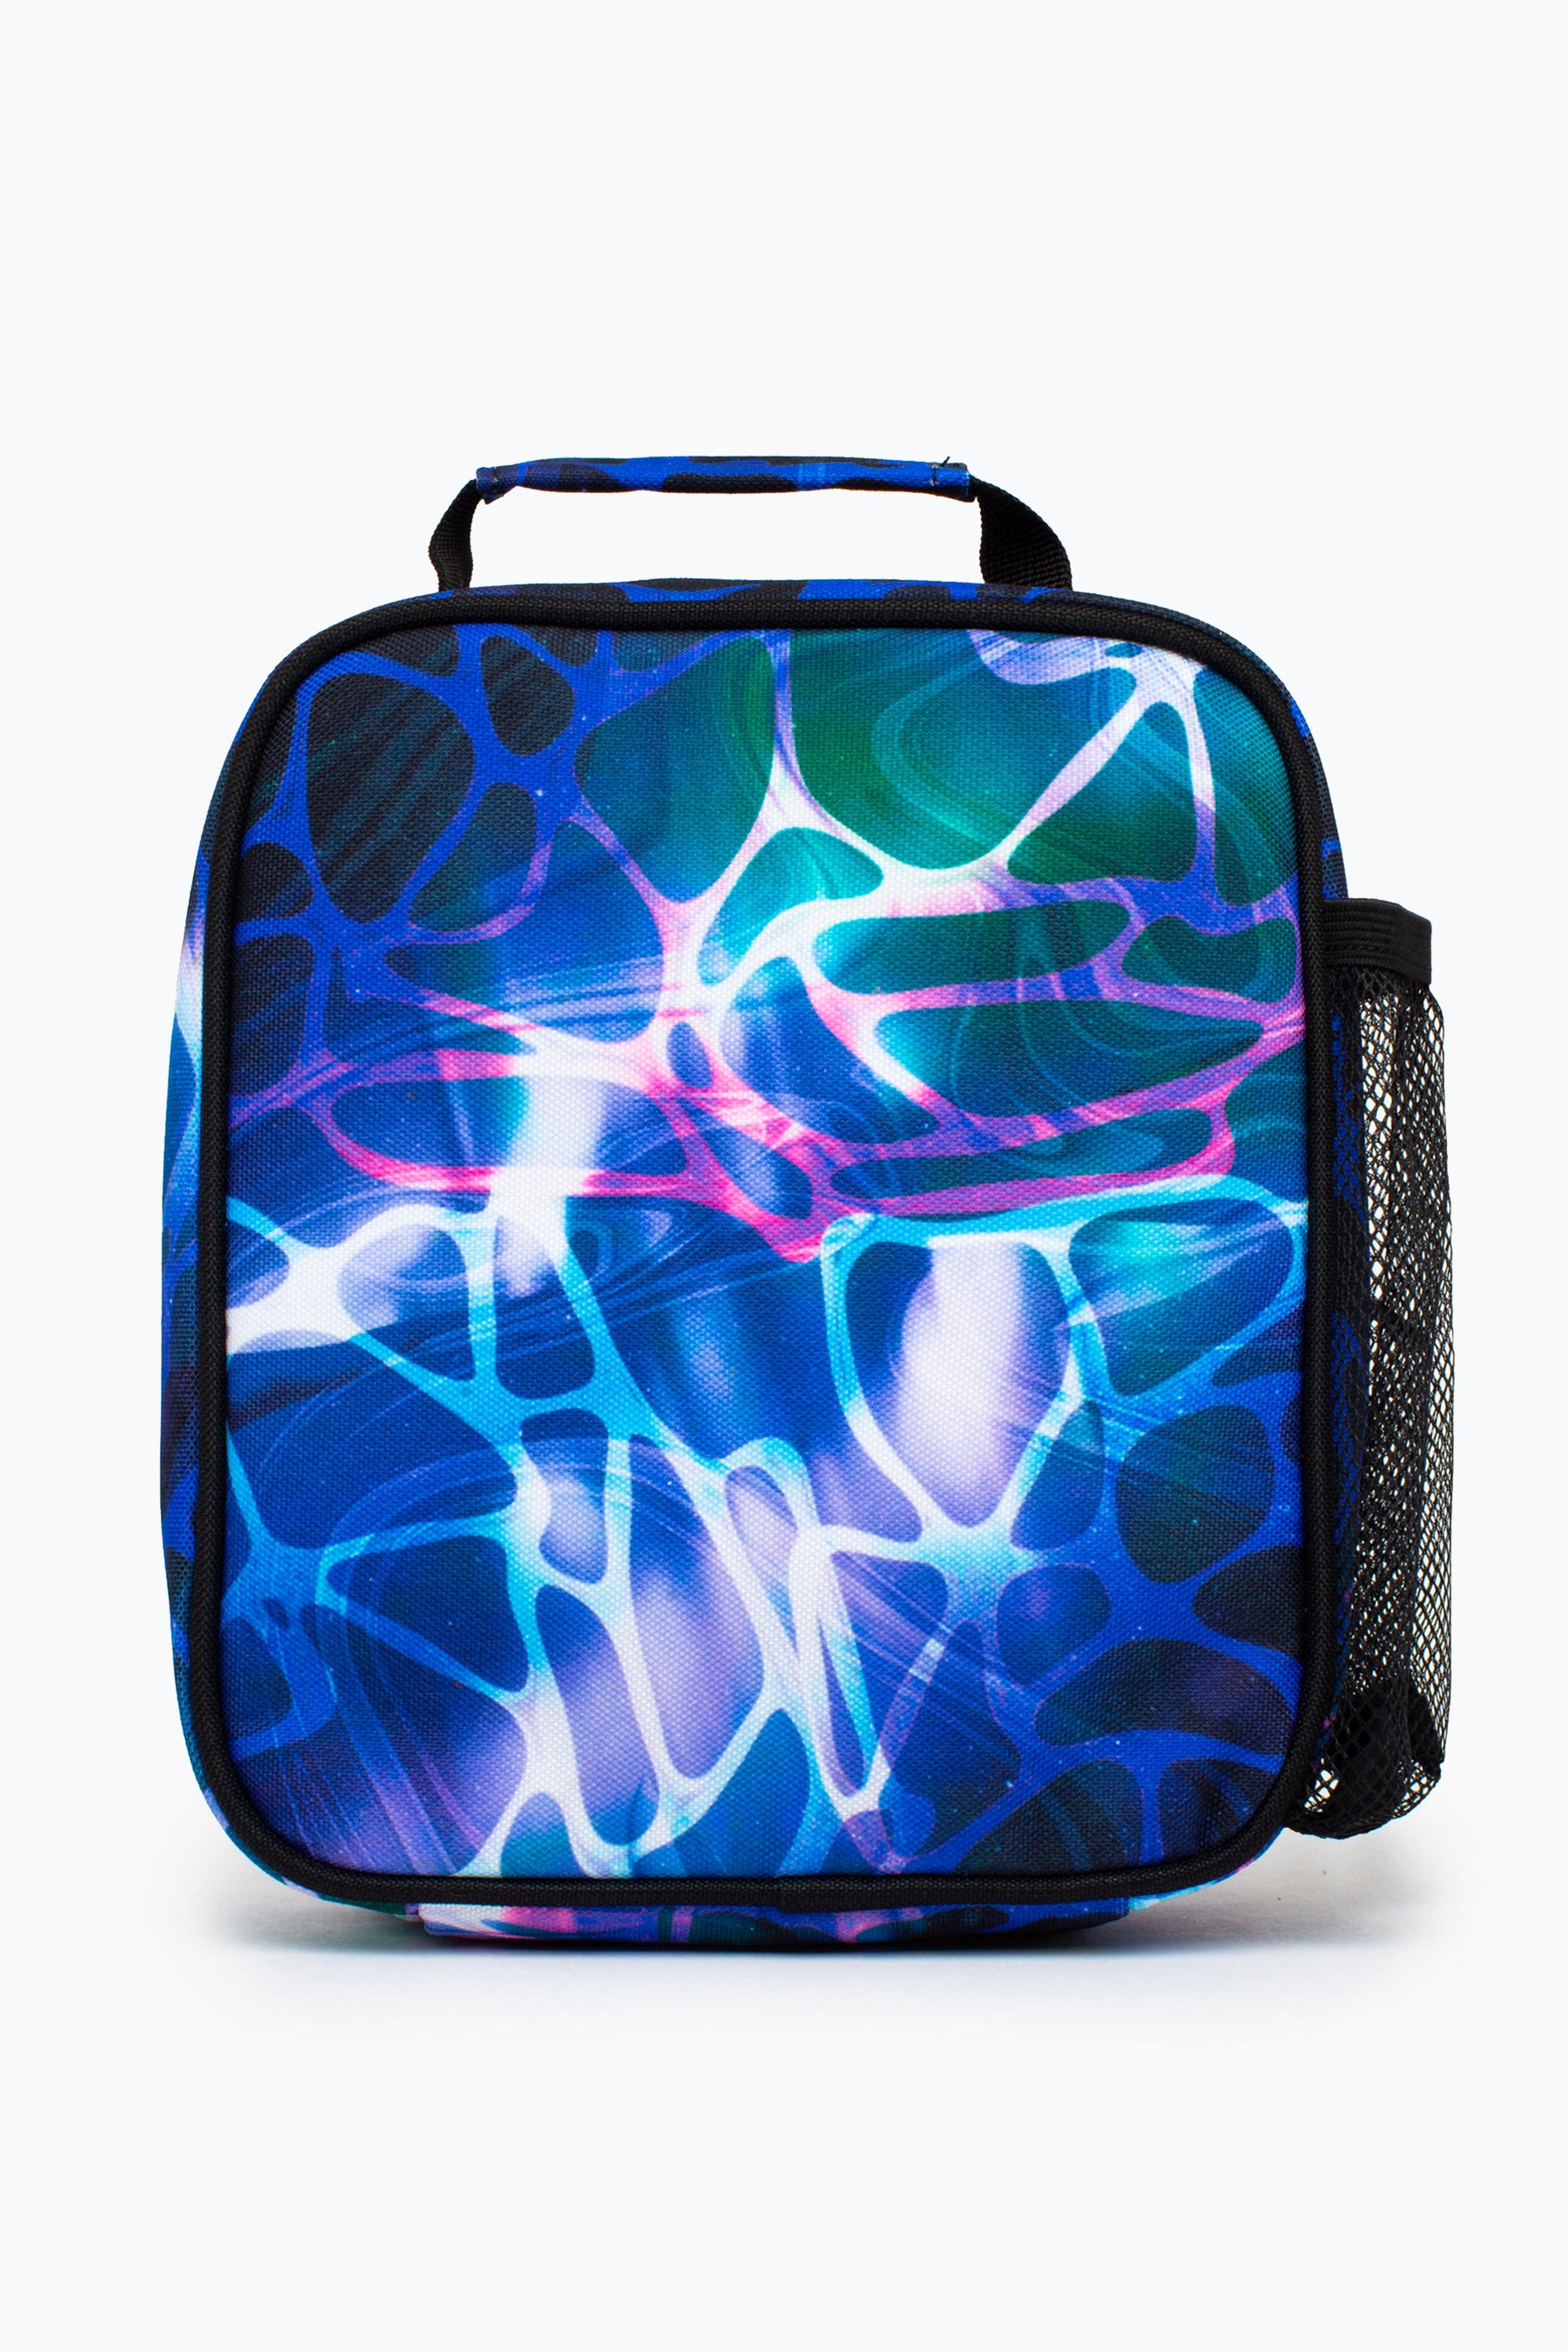 Alternate View 1 of HYPE BLUE SPACE MEMBRANE LUNCH BOX